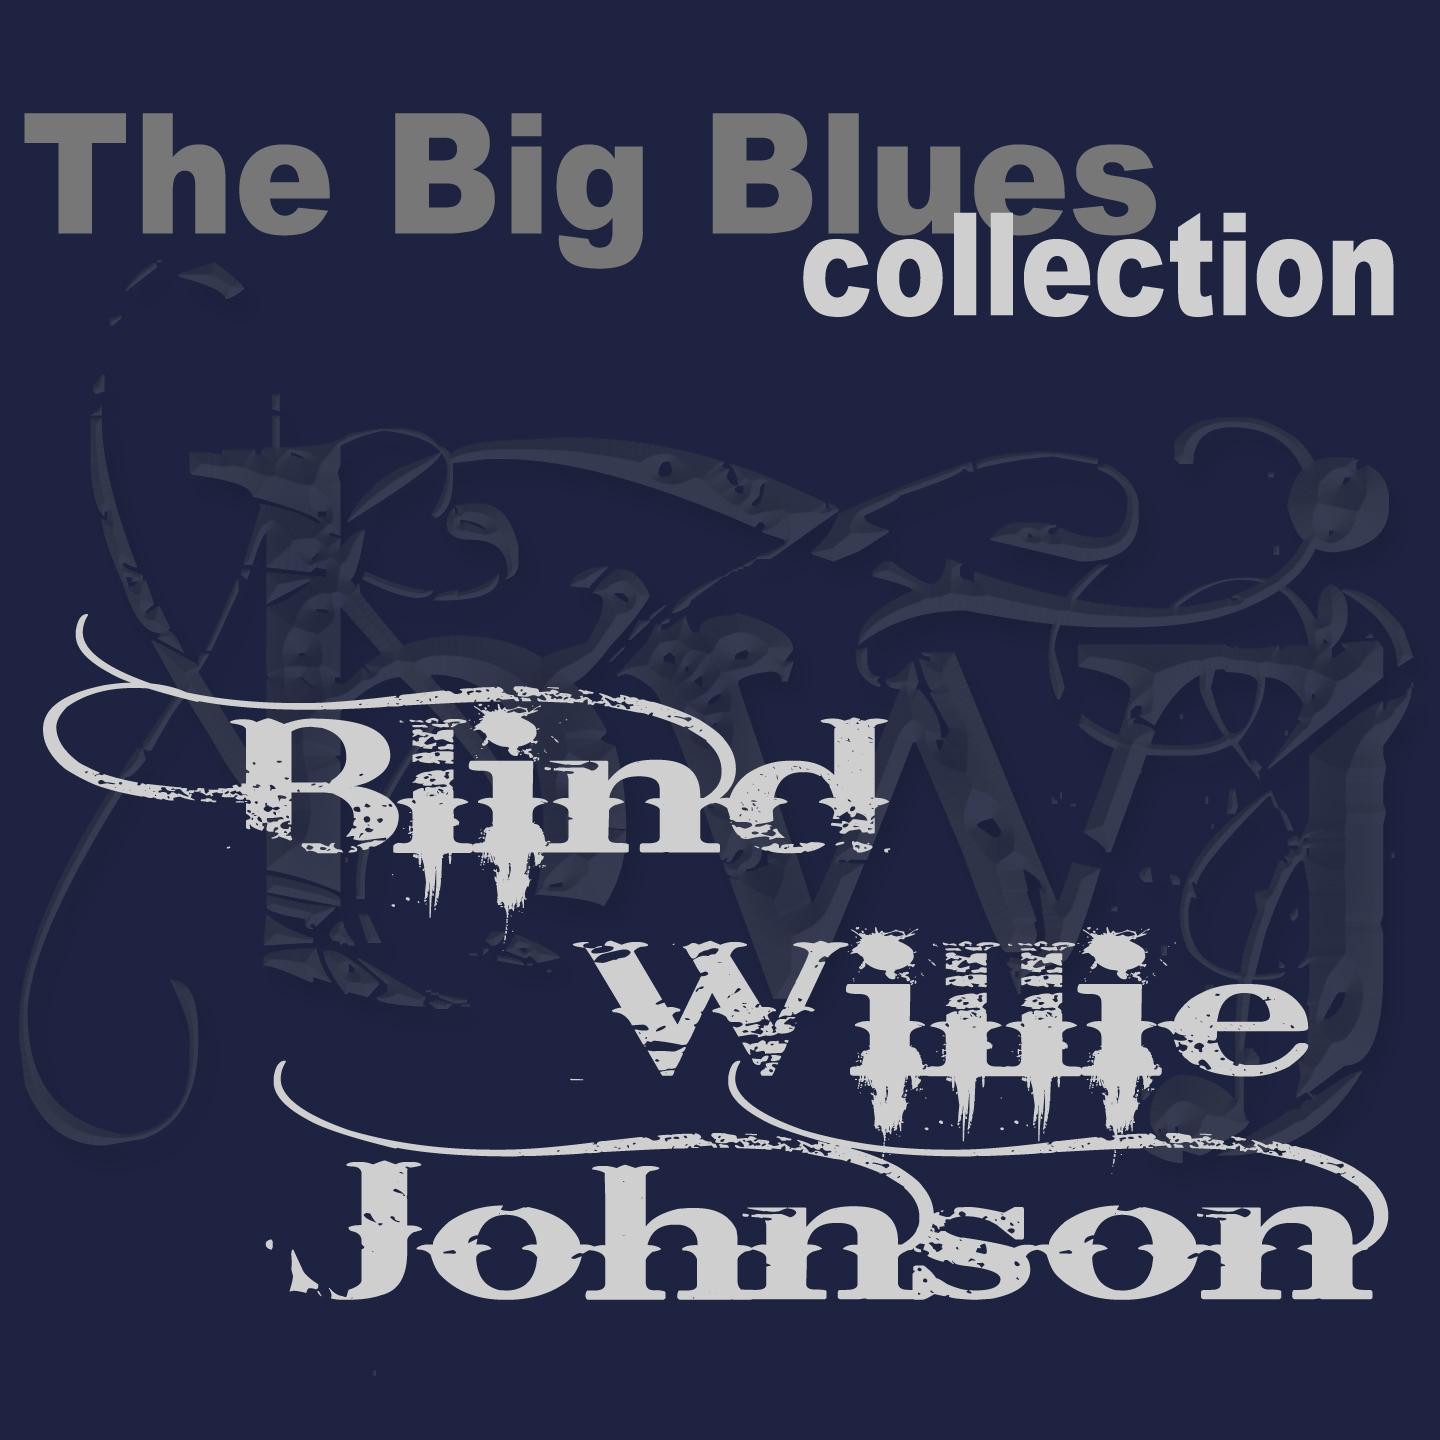 The Big Blues Collection